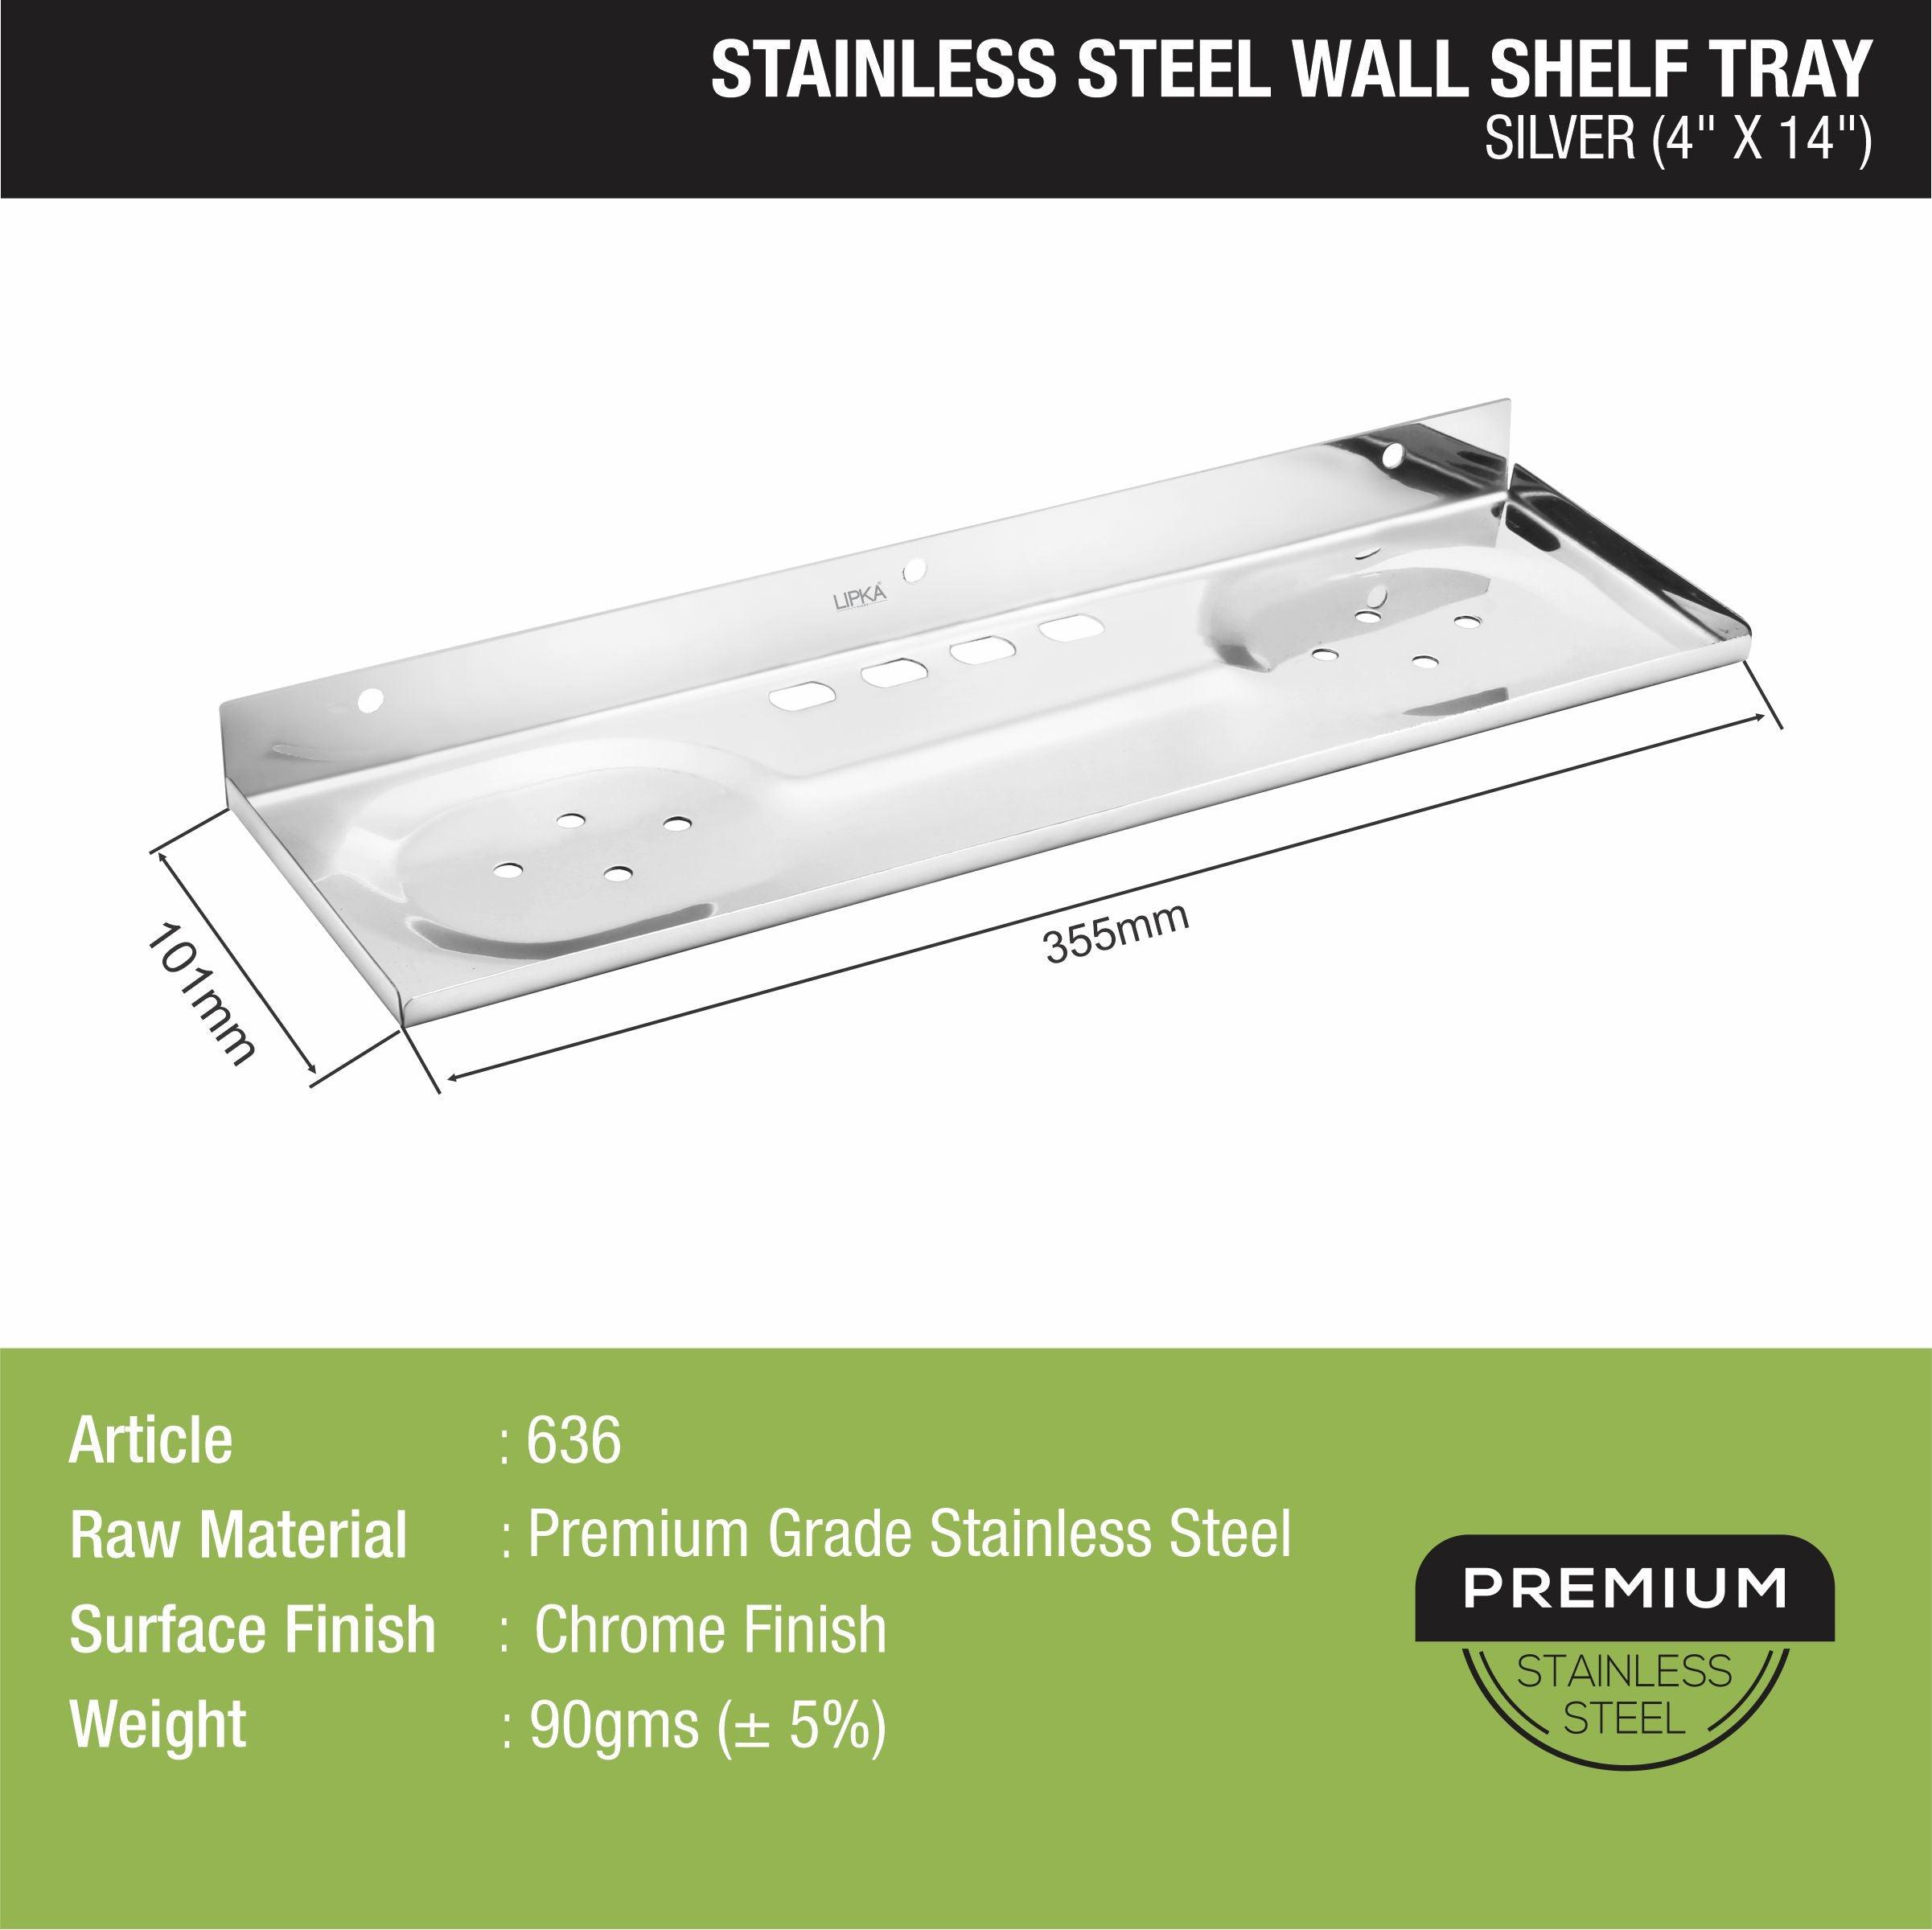 Silver Wall Shelf Tray (4 x 14 Inches) size and delivery